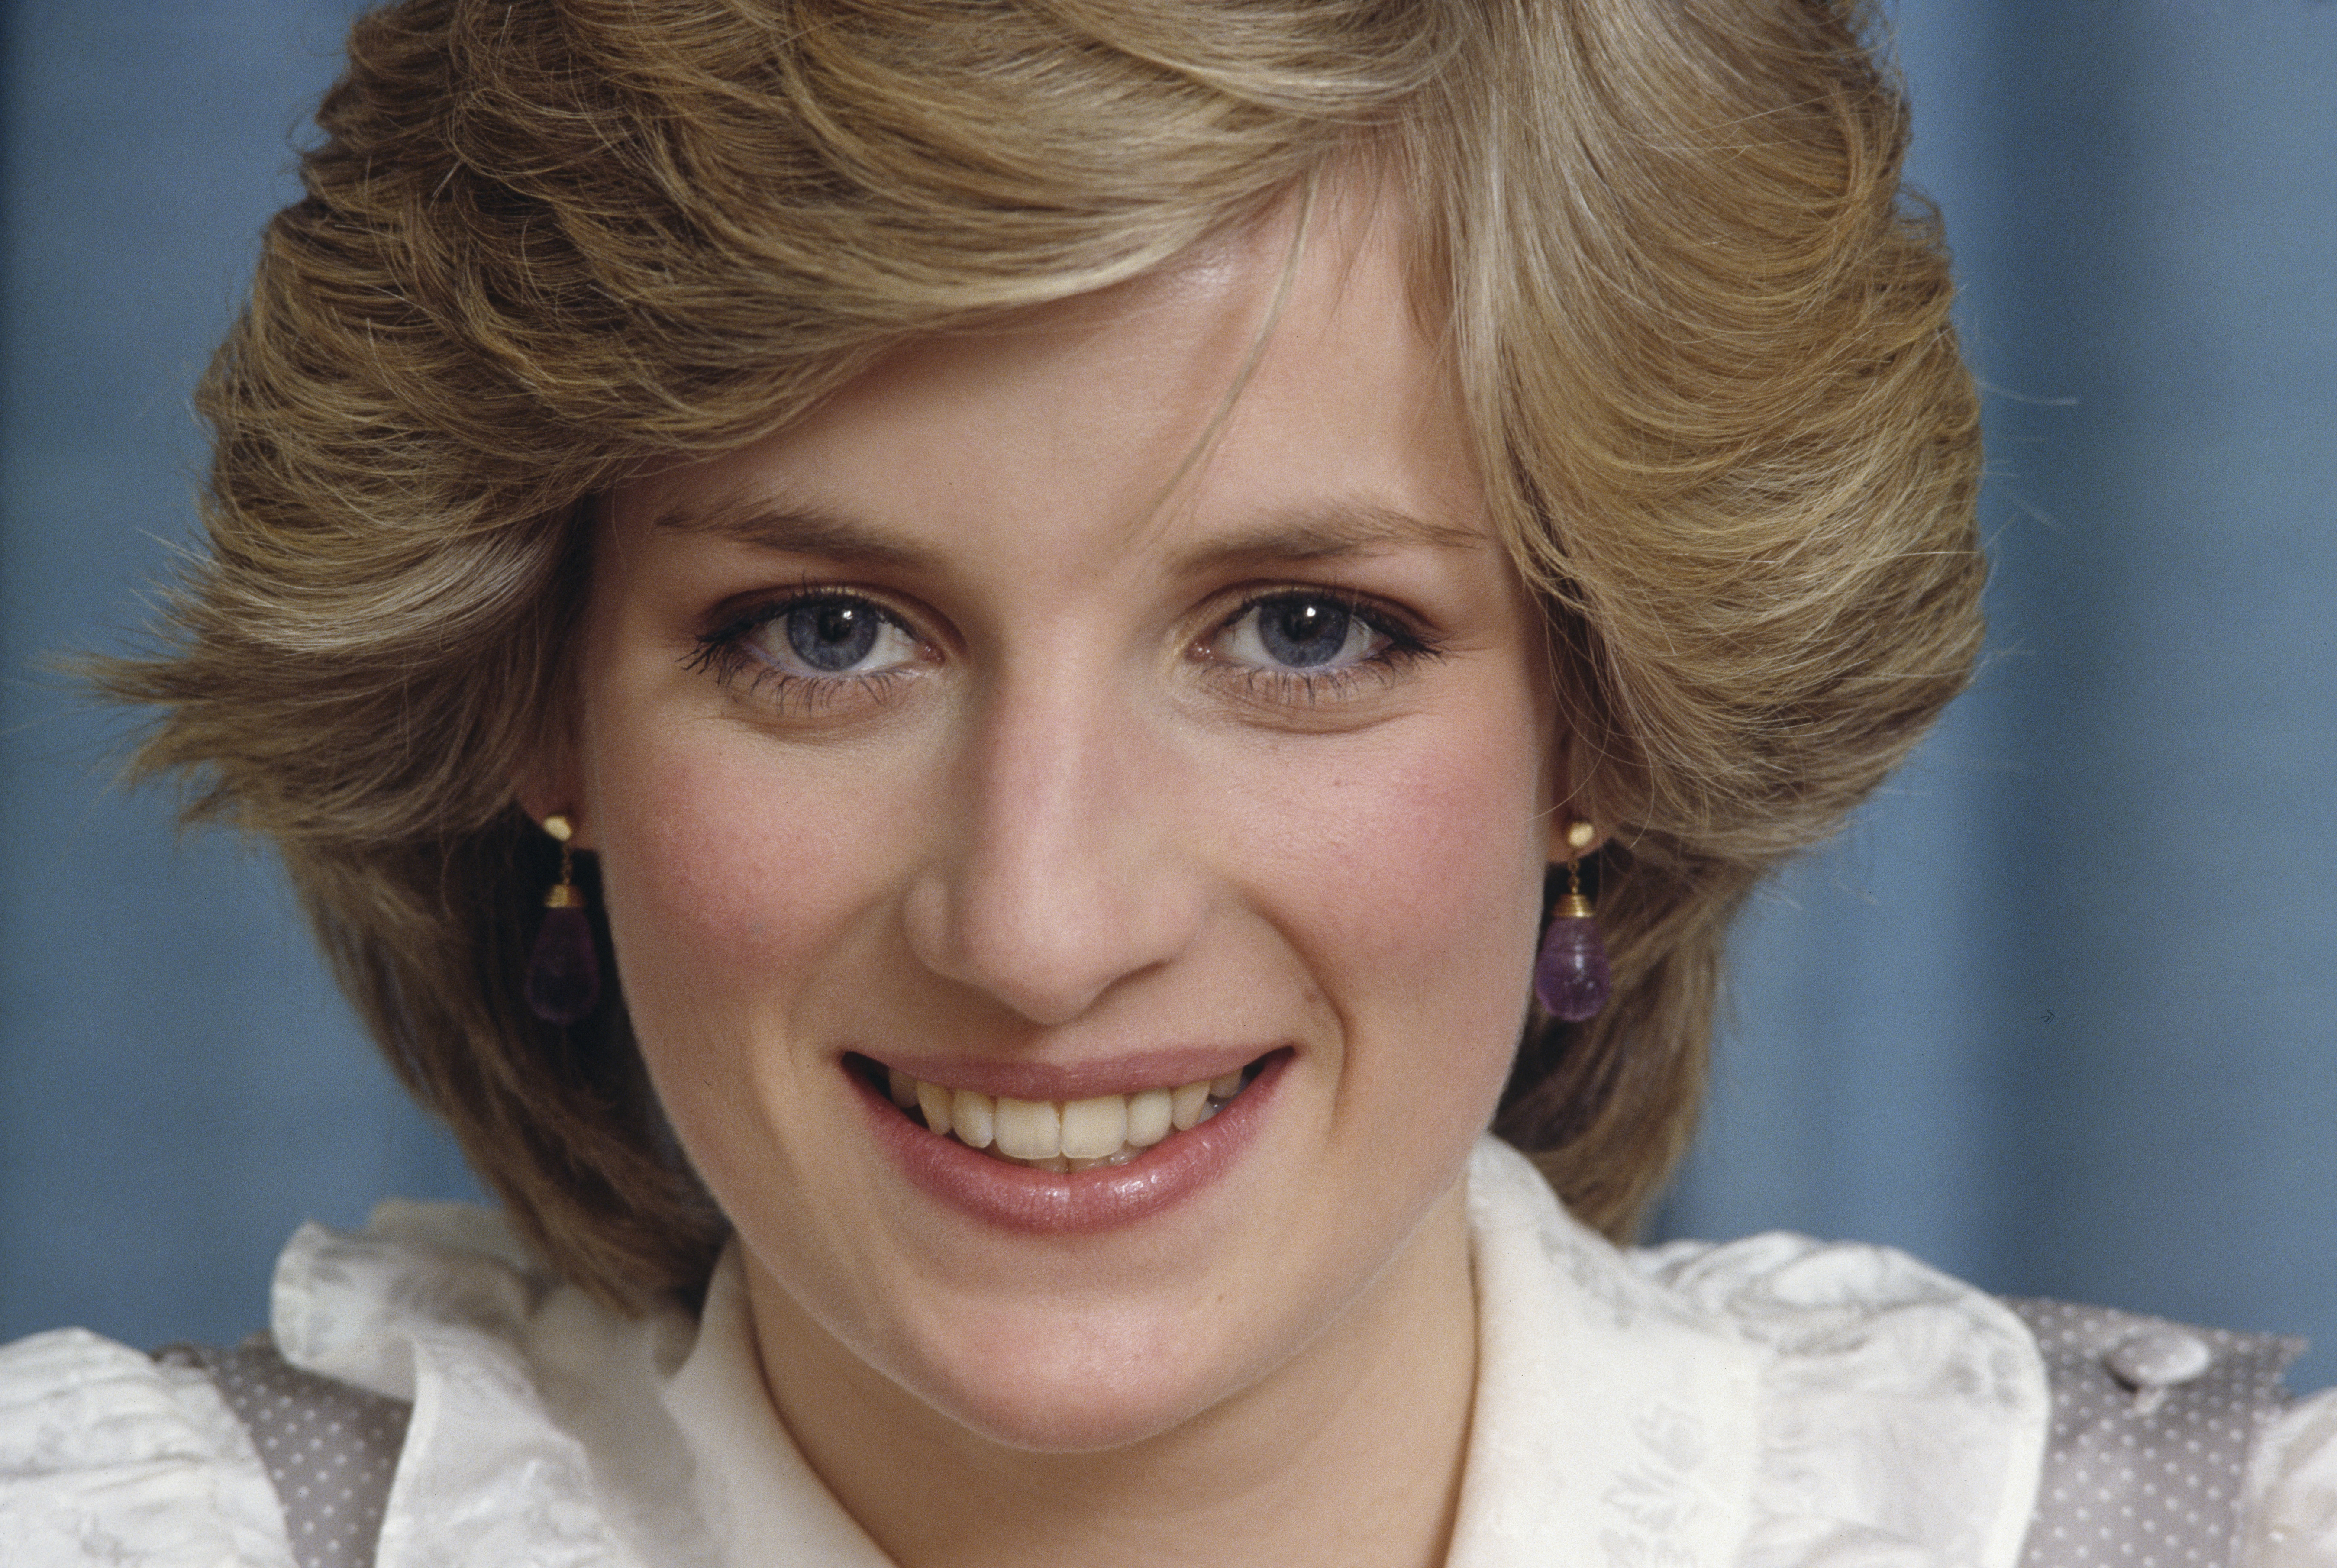 Diana Princess pictured at home on February 1983 in Kensington Palace, London. | Source: Getty Images